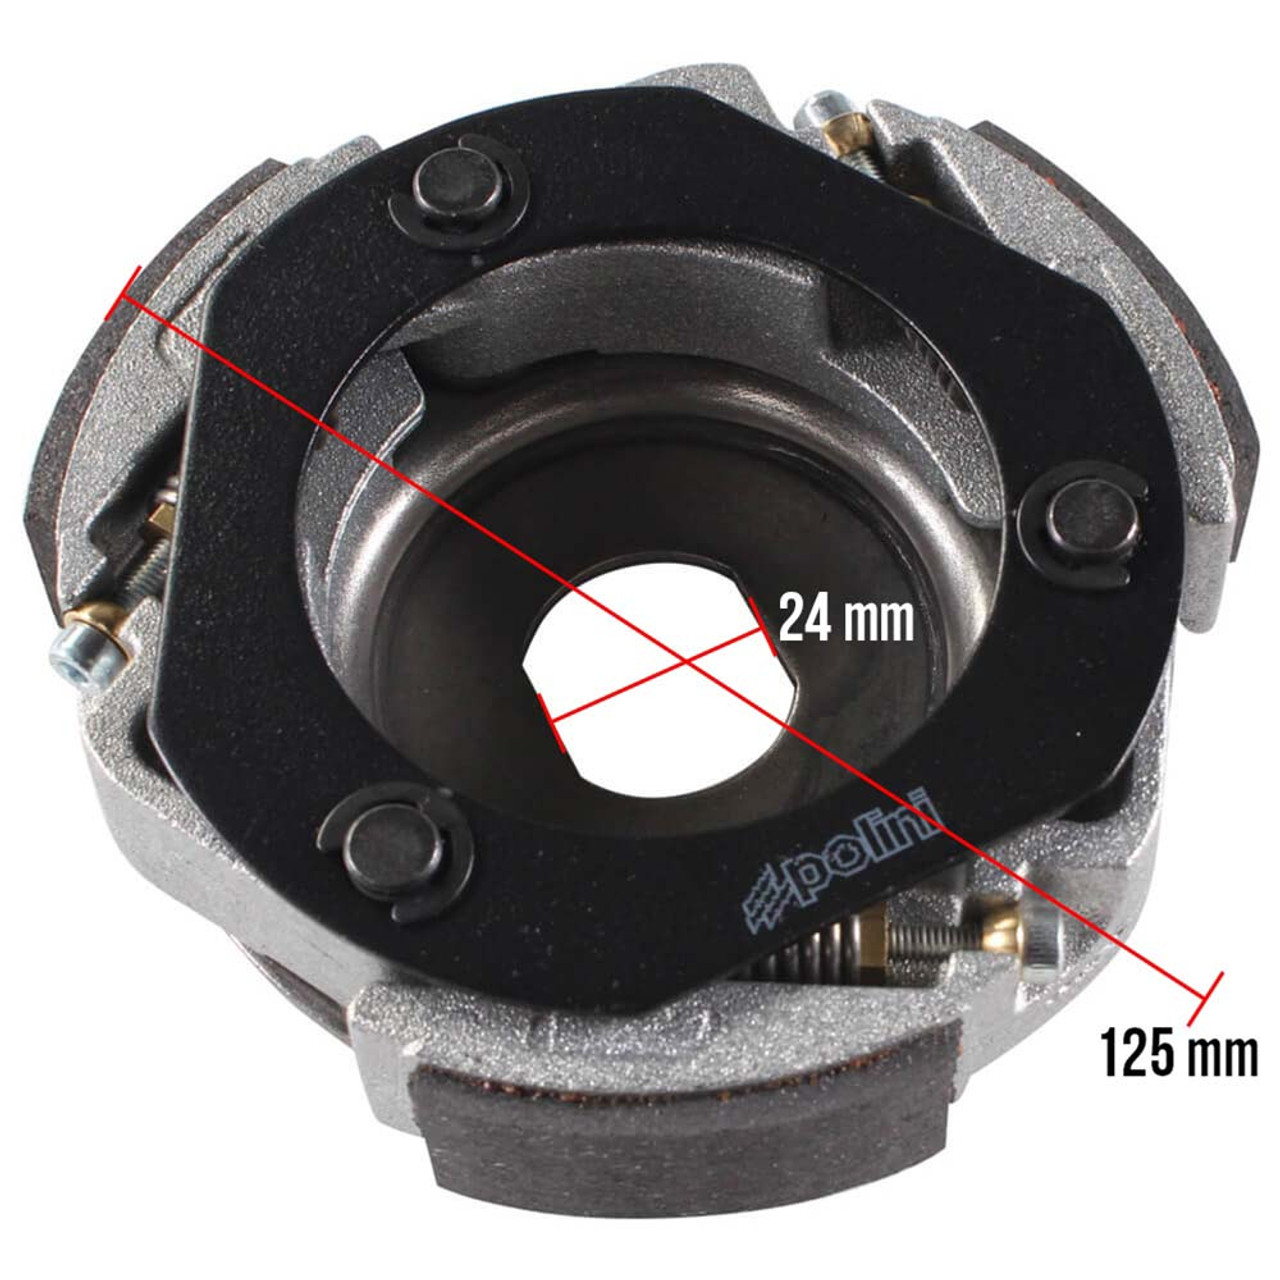 POLINI PERFORMANCE 3G MAXI-SPEED ADJUSTABLE CLUTCH FOR GY6 150cc MOTORS